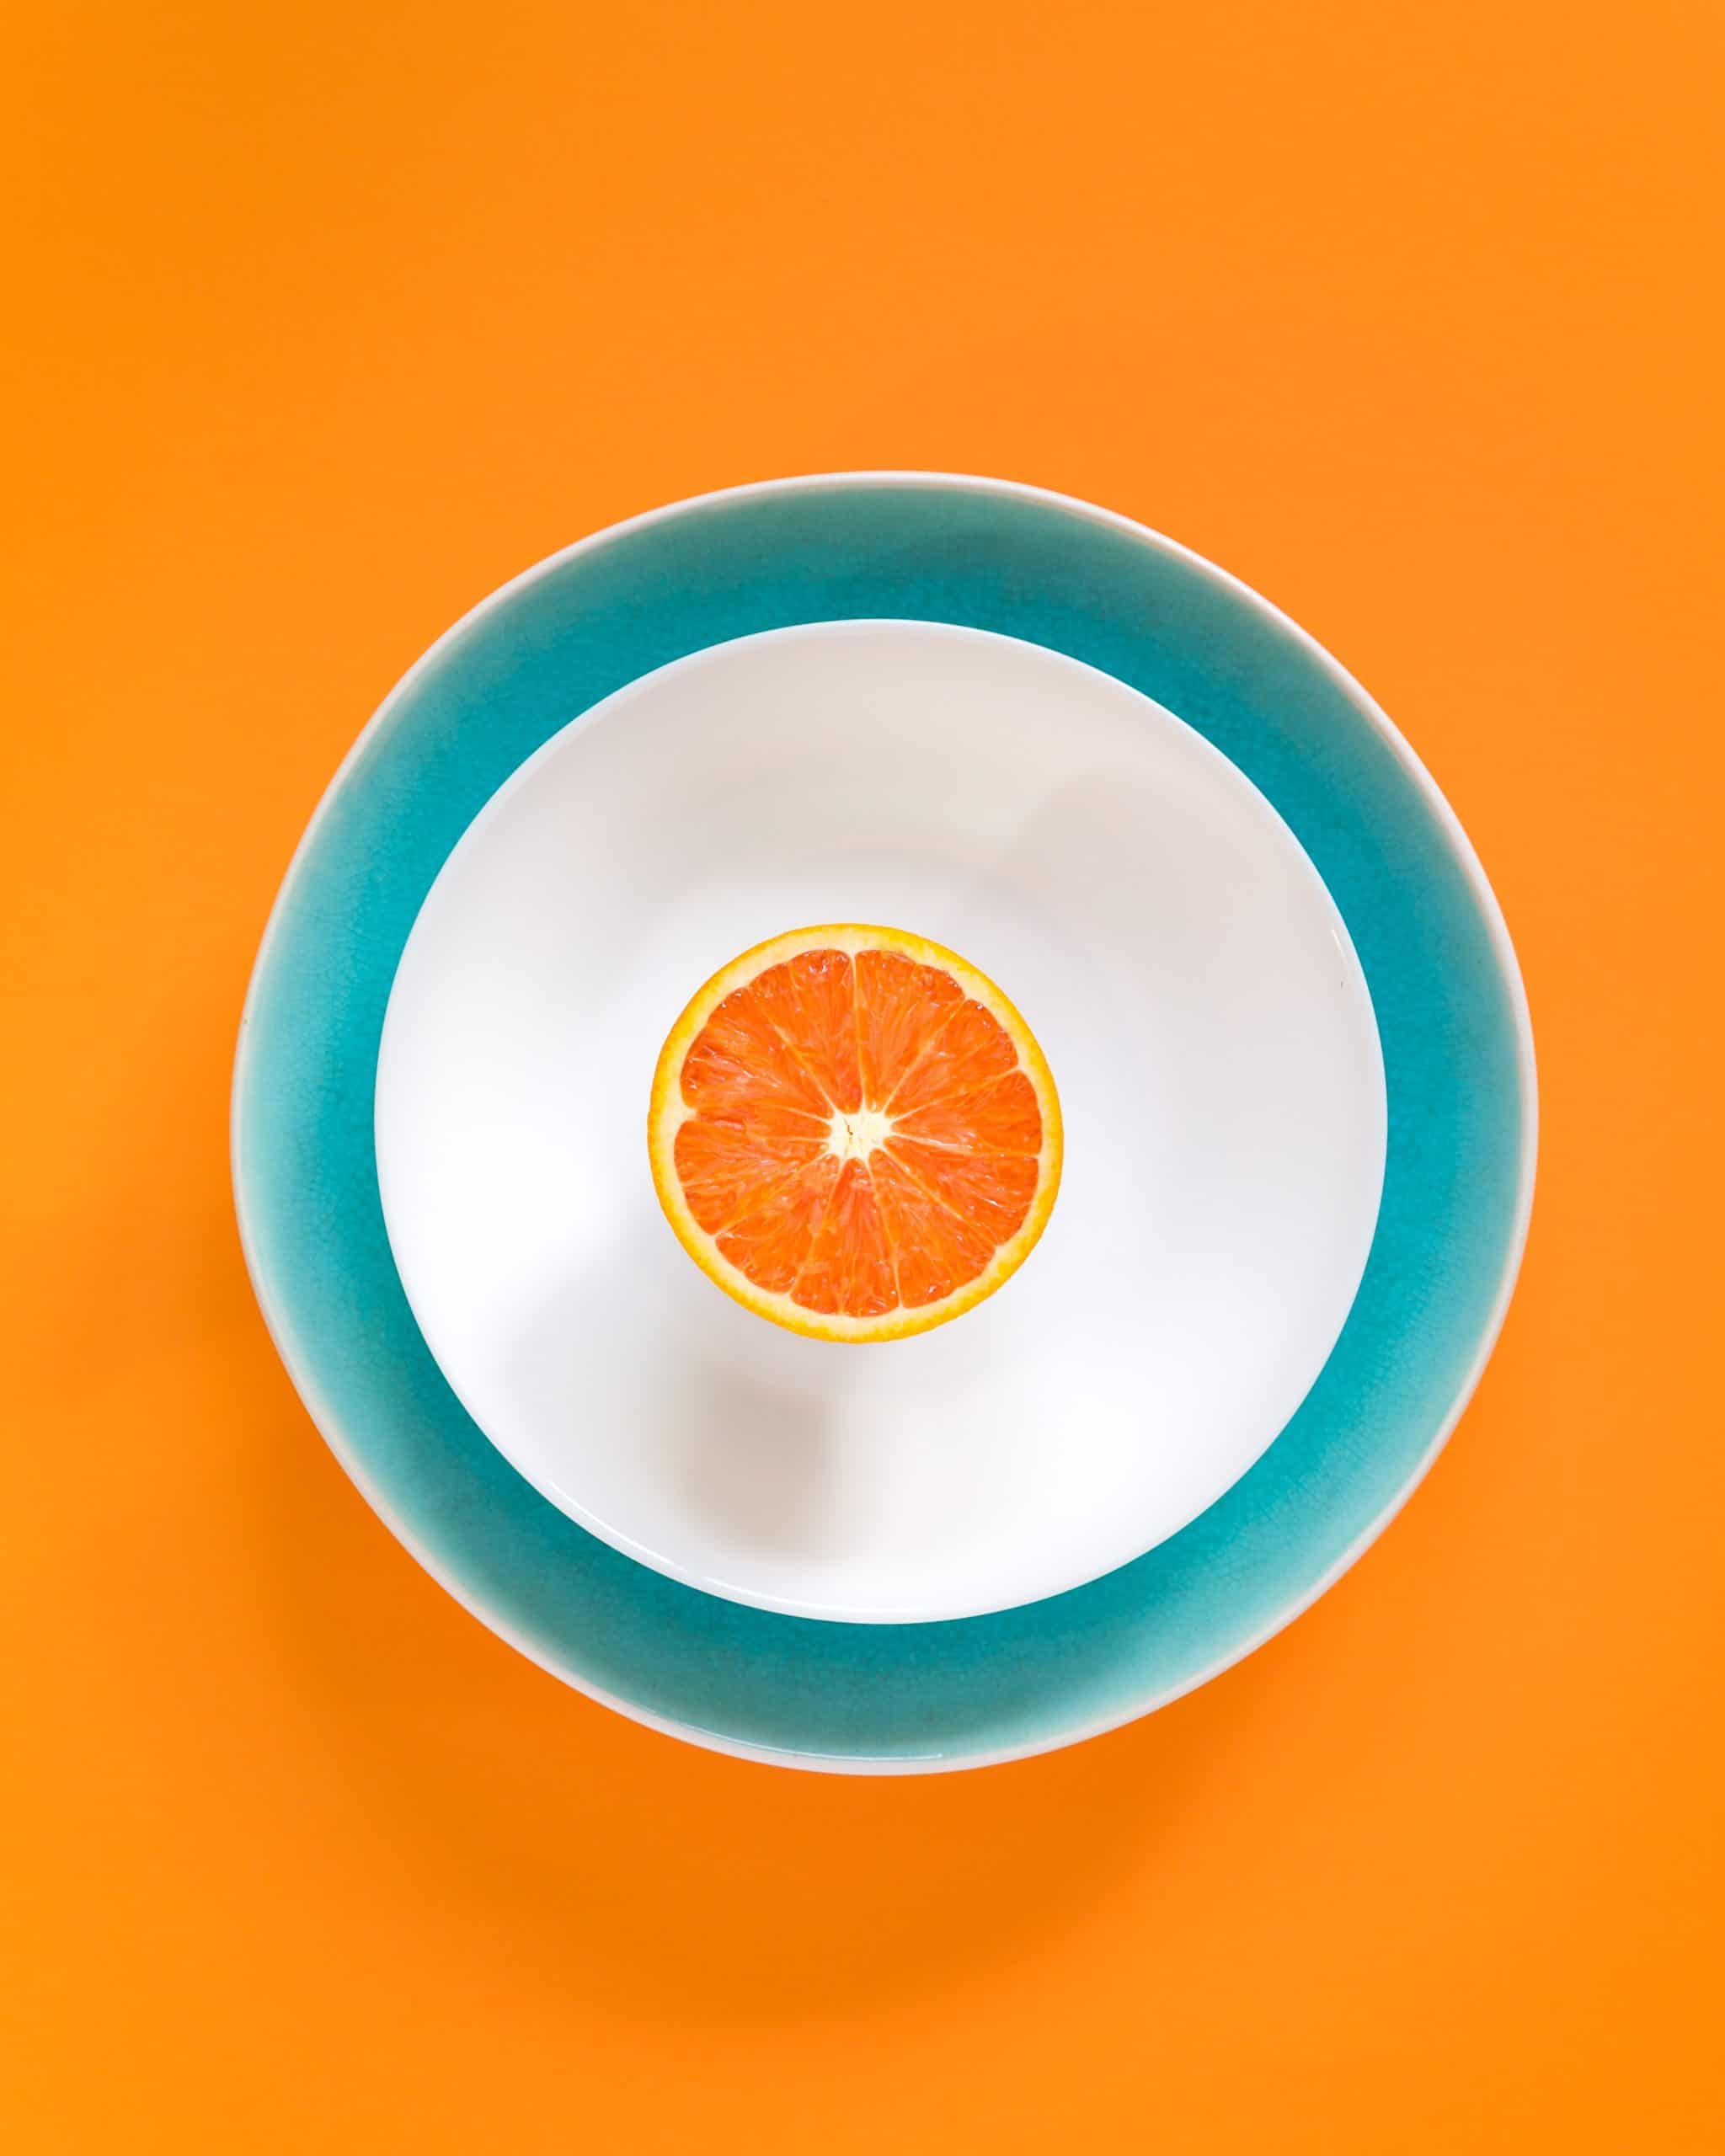 half of an orange in a white and teal bowl on an orange background.